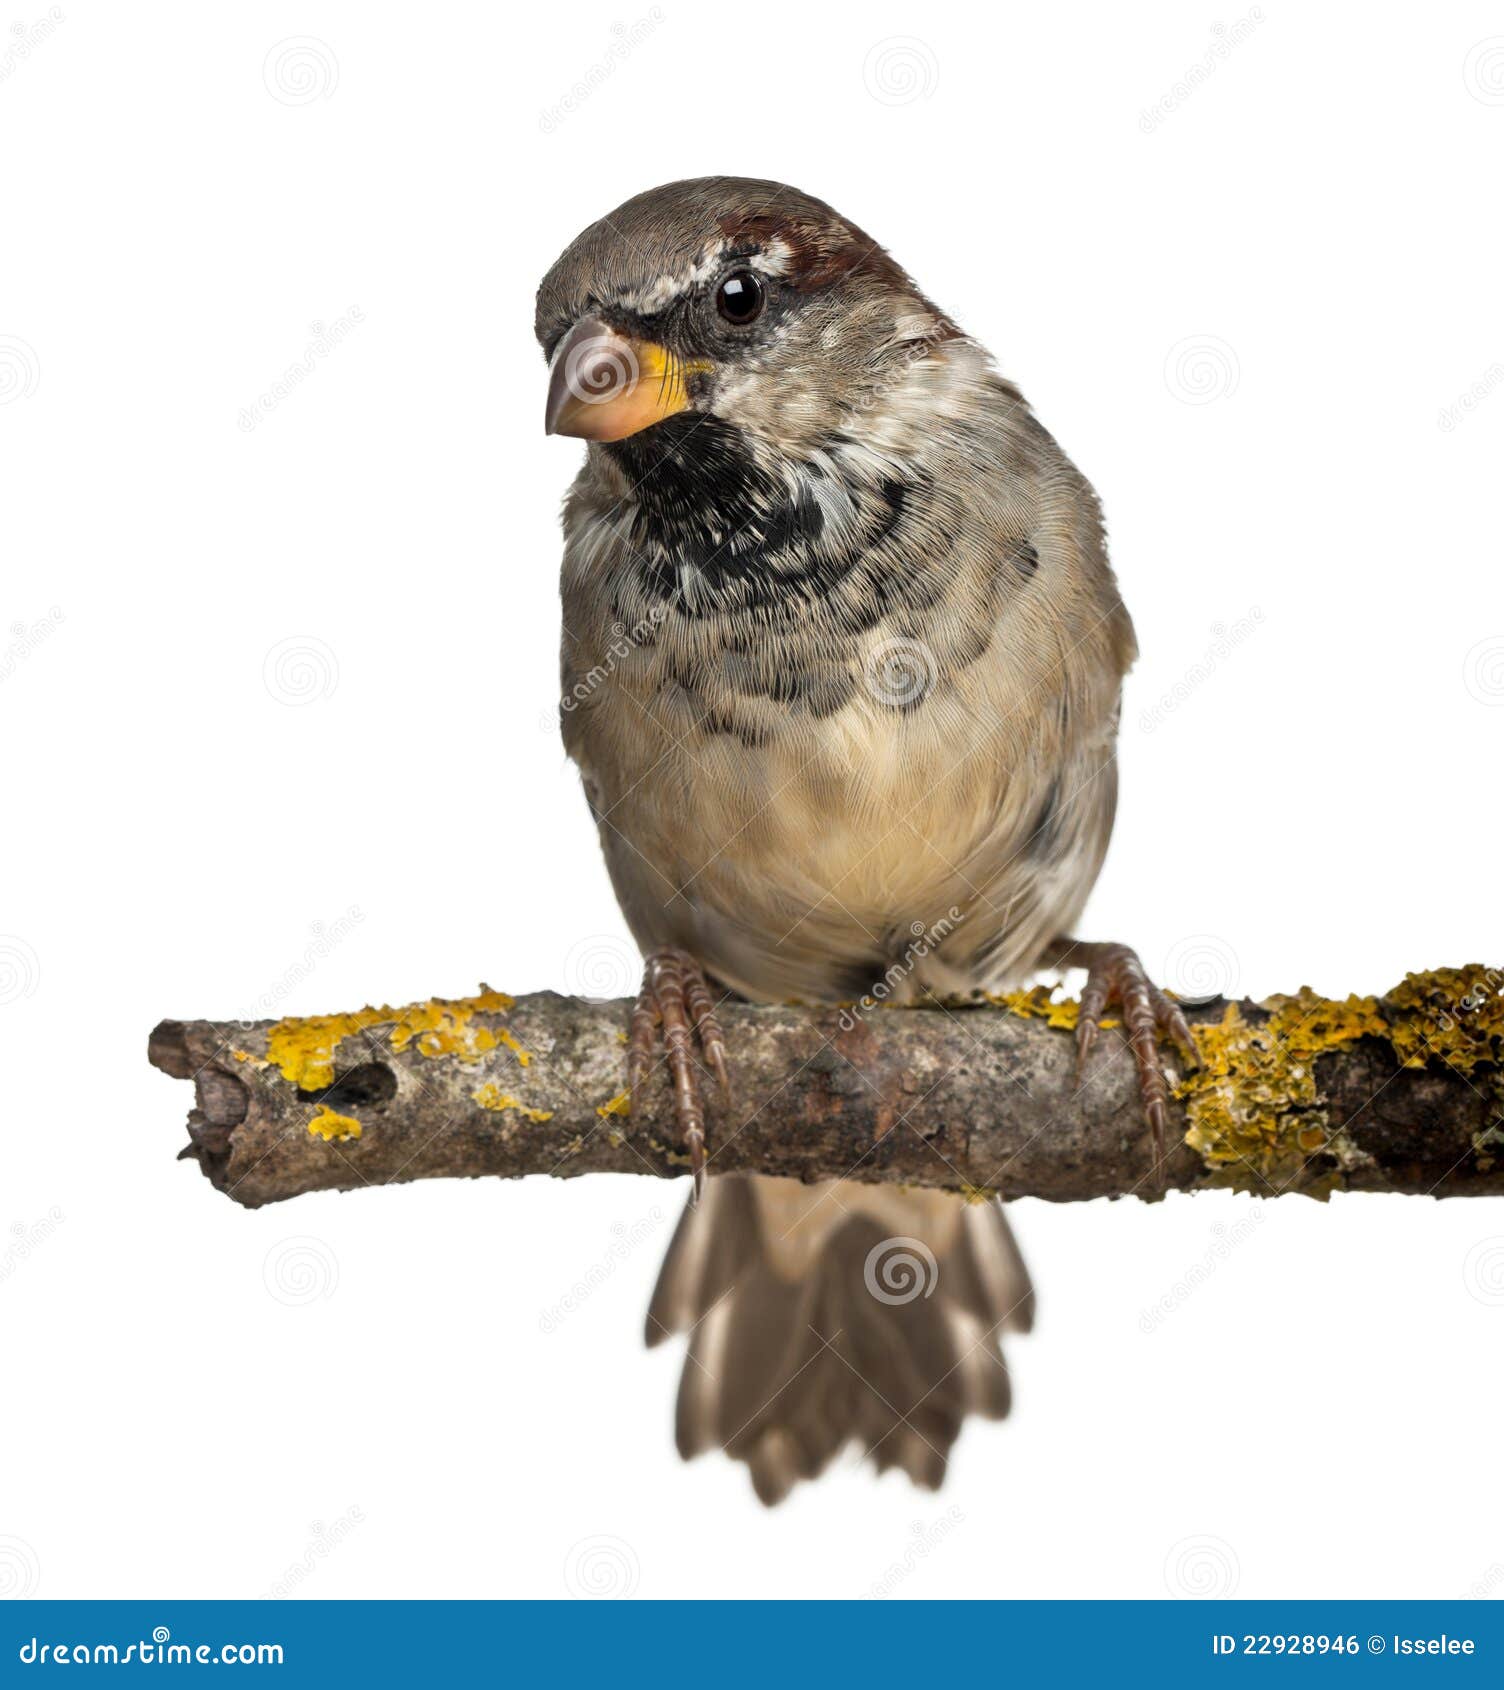 male house sparrow, passer domesticus, 4 months